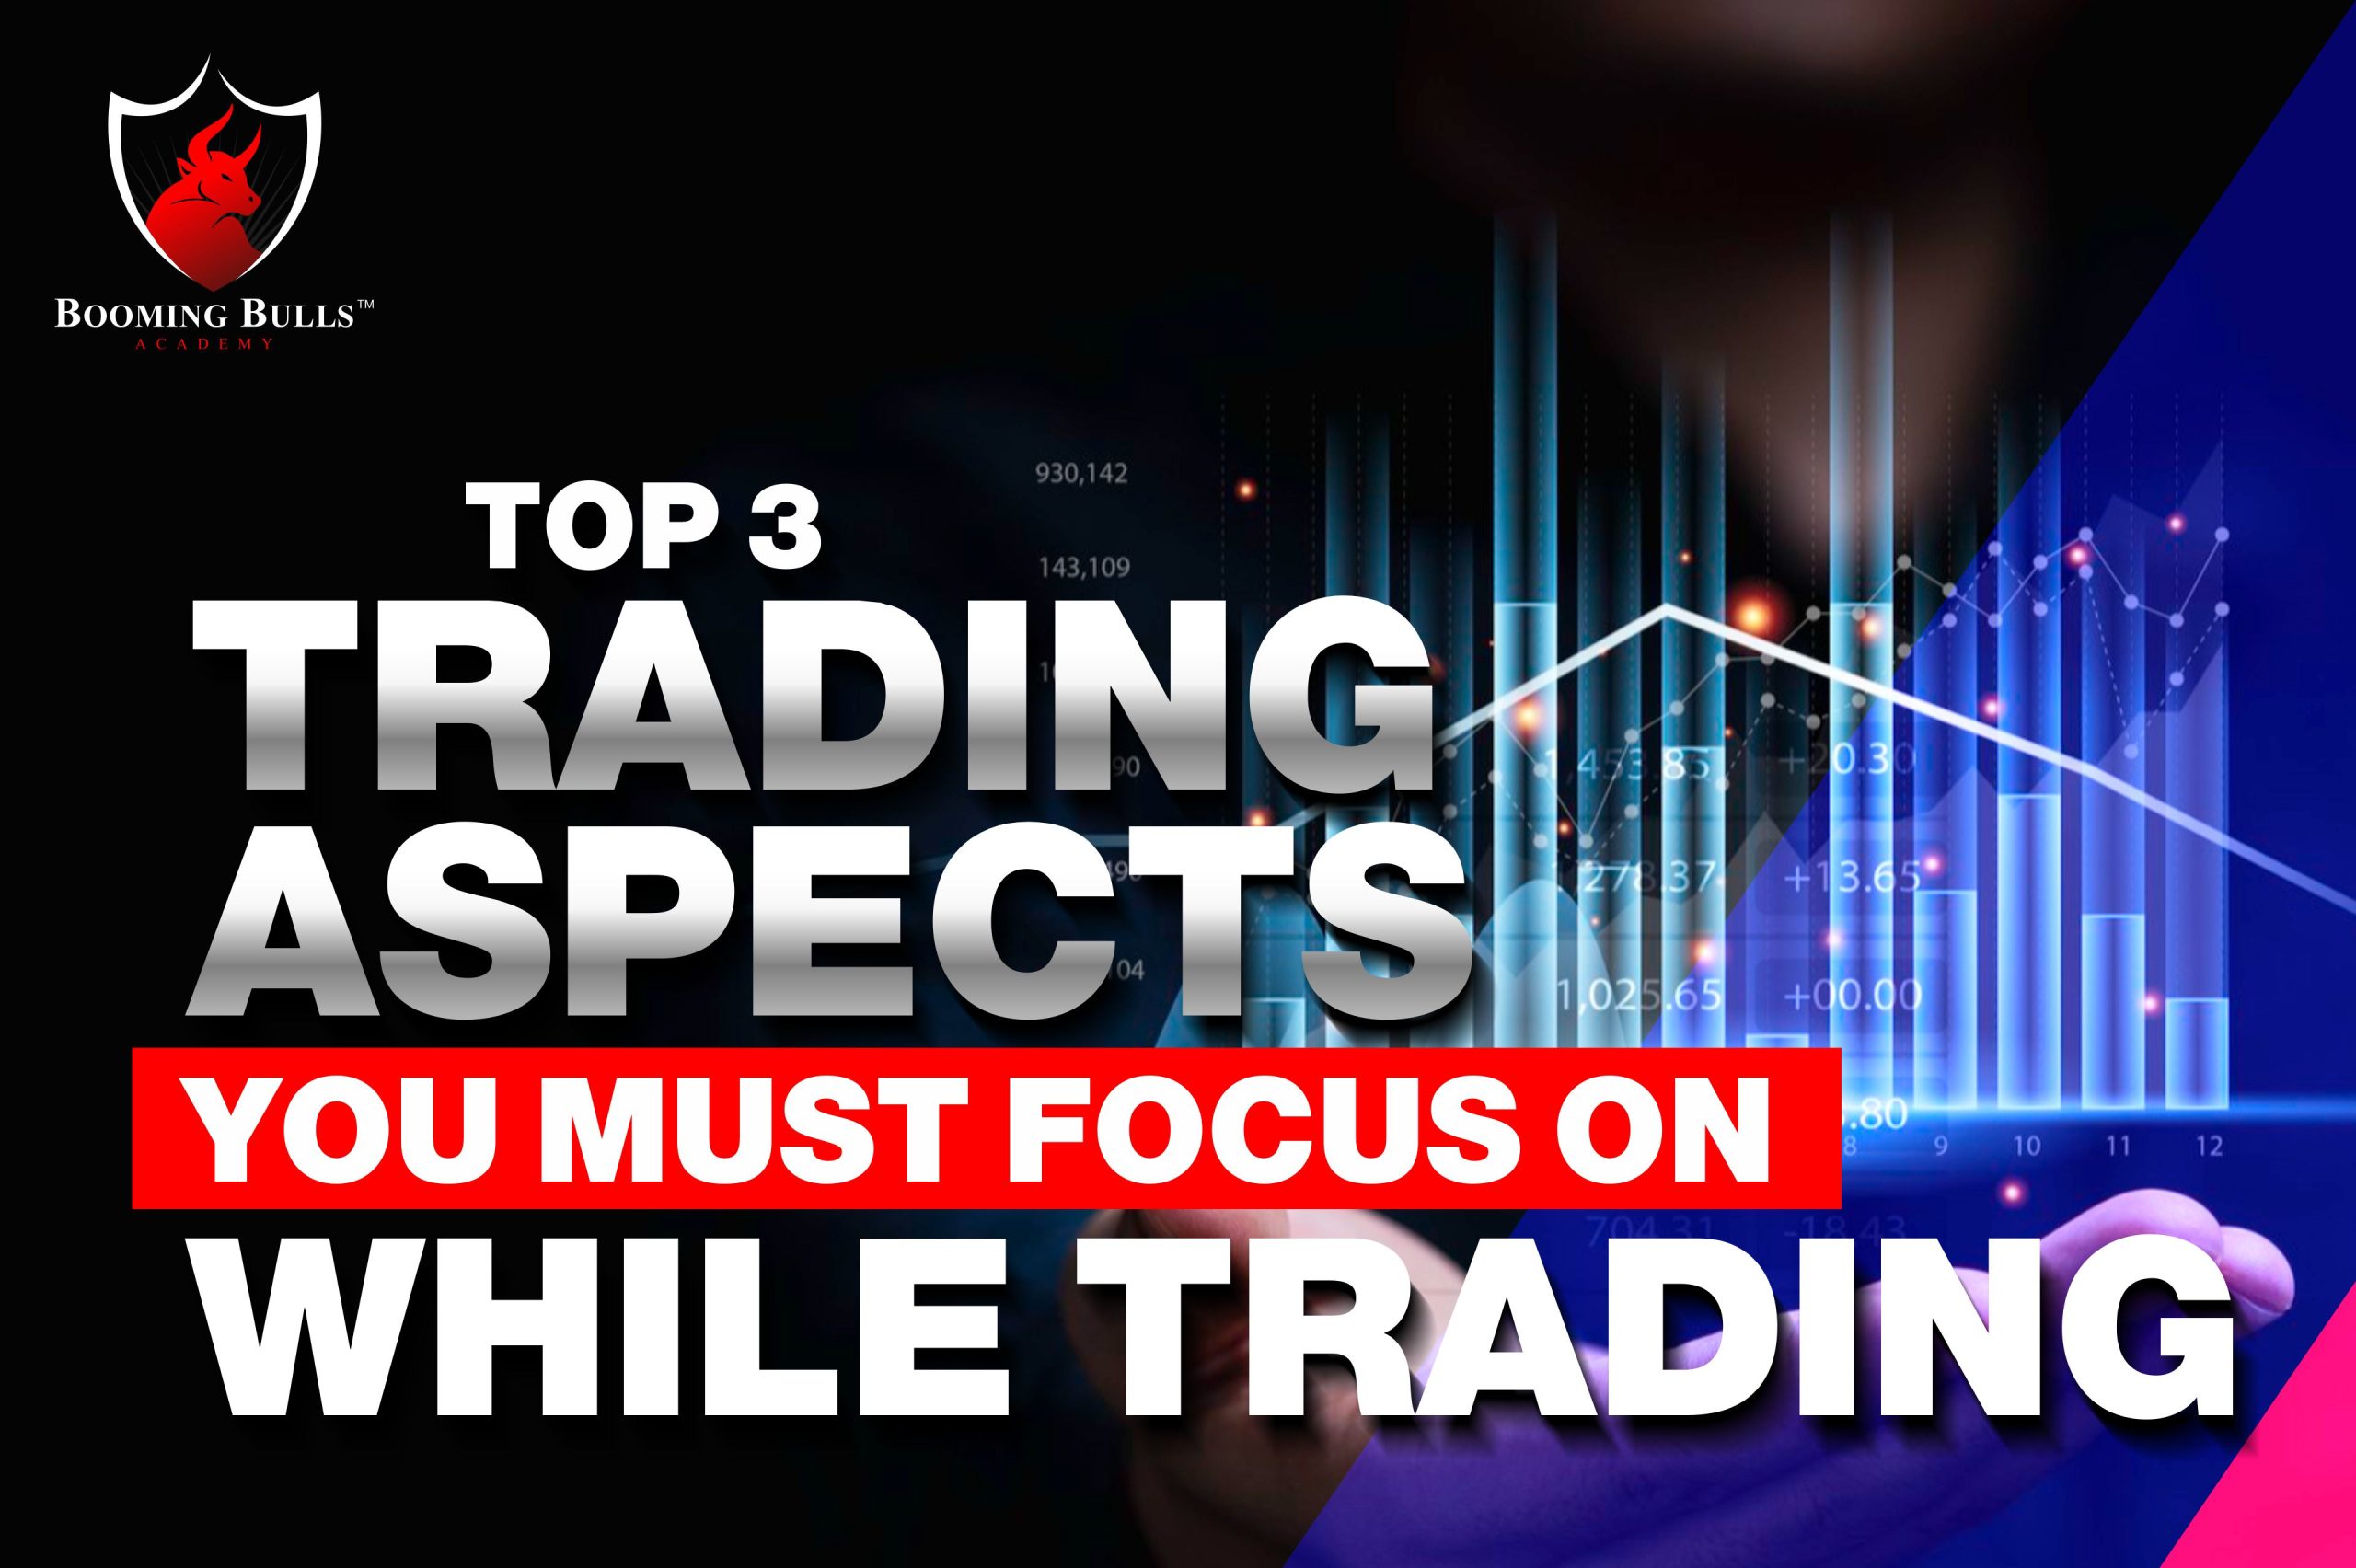 Top 3 Trading Aspects You Must Focus On While Trading